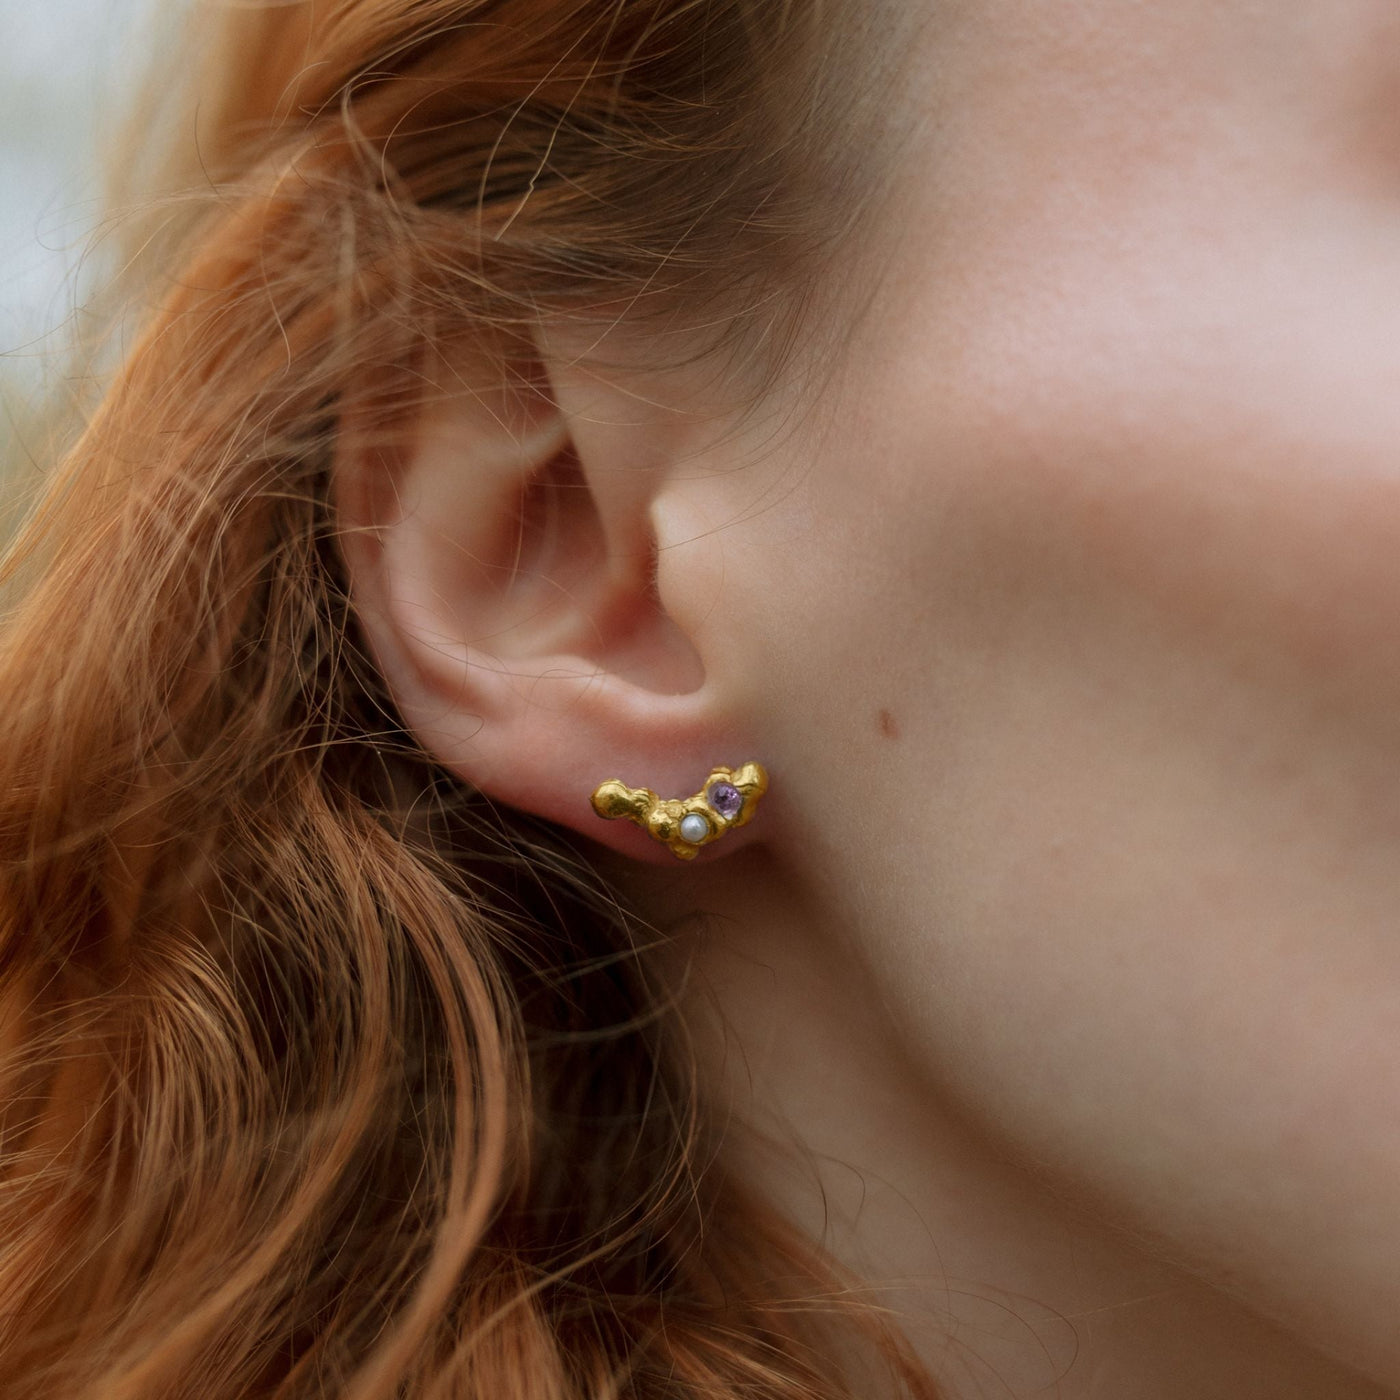 Bridal jewelery MORSKOGEN // Ear studs gold-plated with delicate tourmalines and freshwater pearls